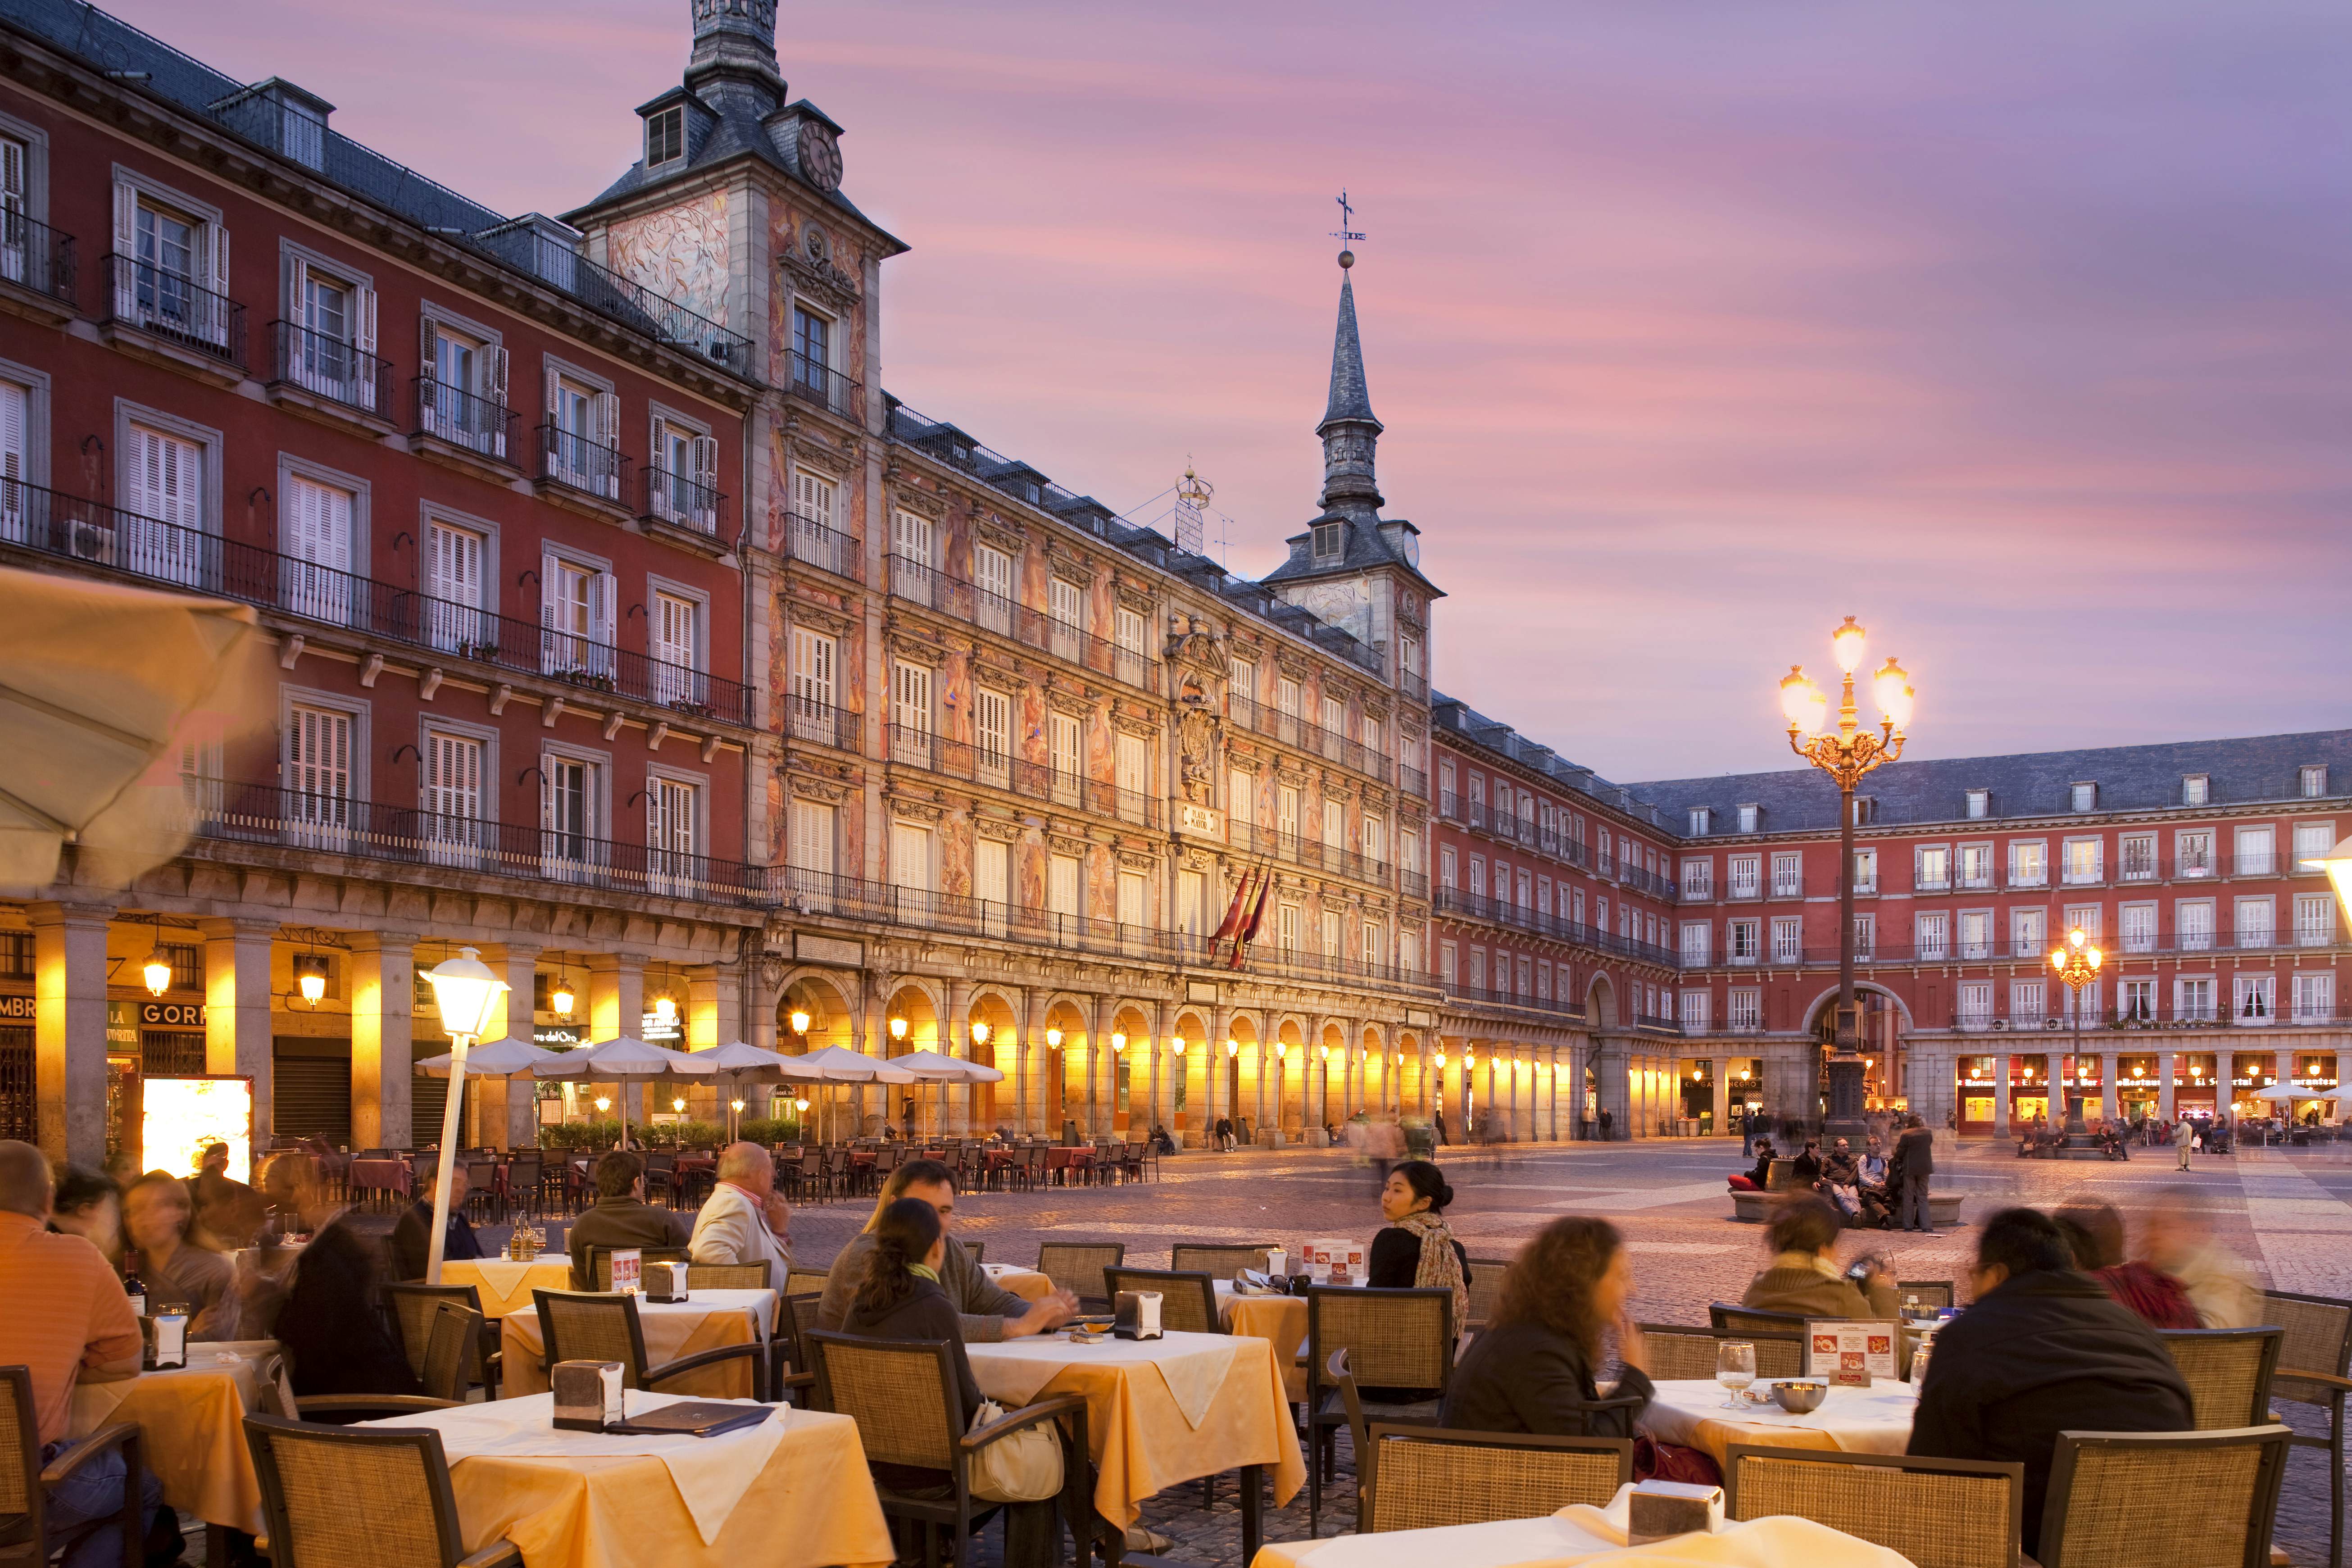 Madrid is one of the cities with the best quality of life in the